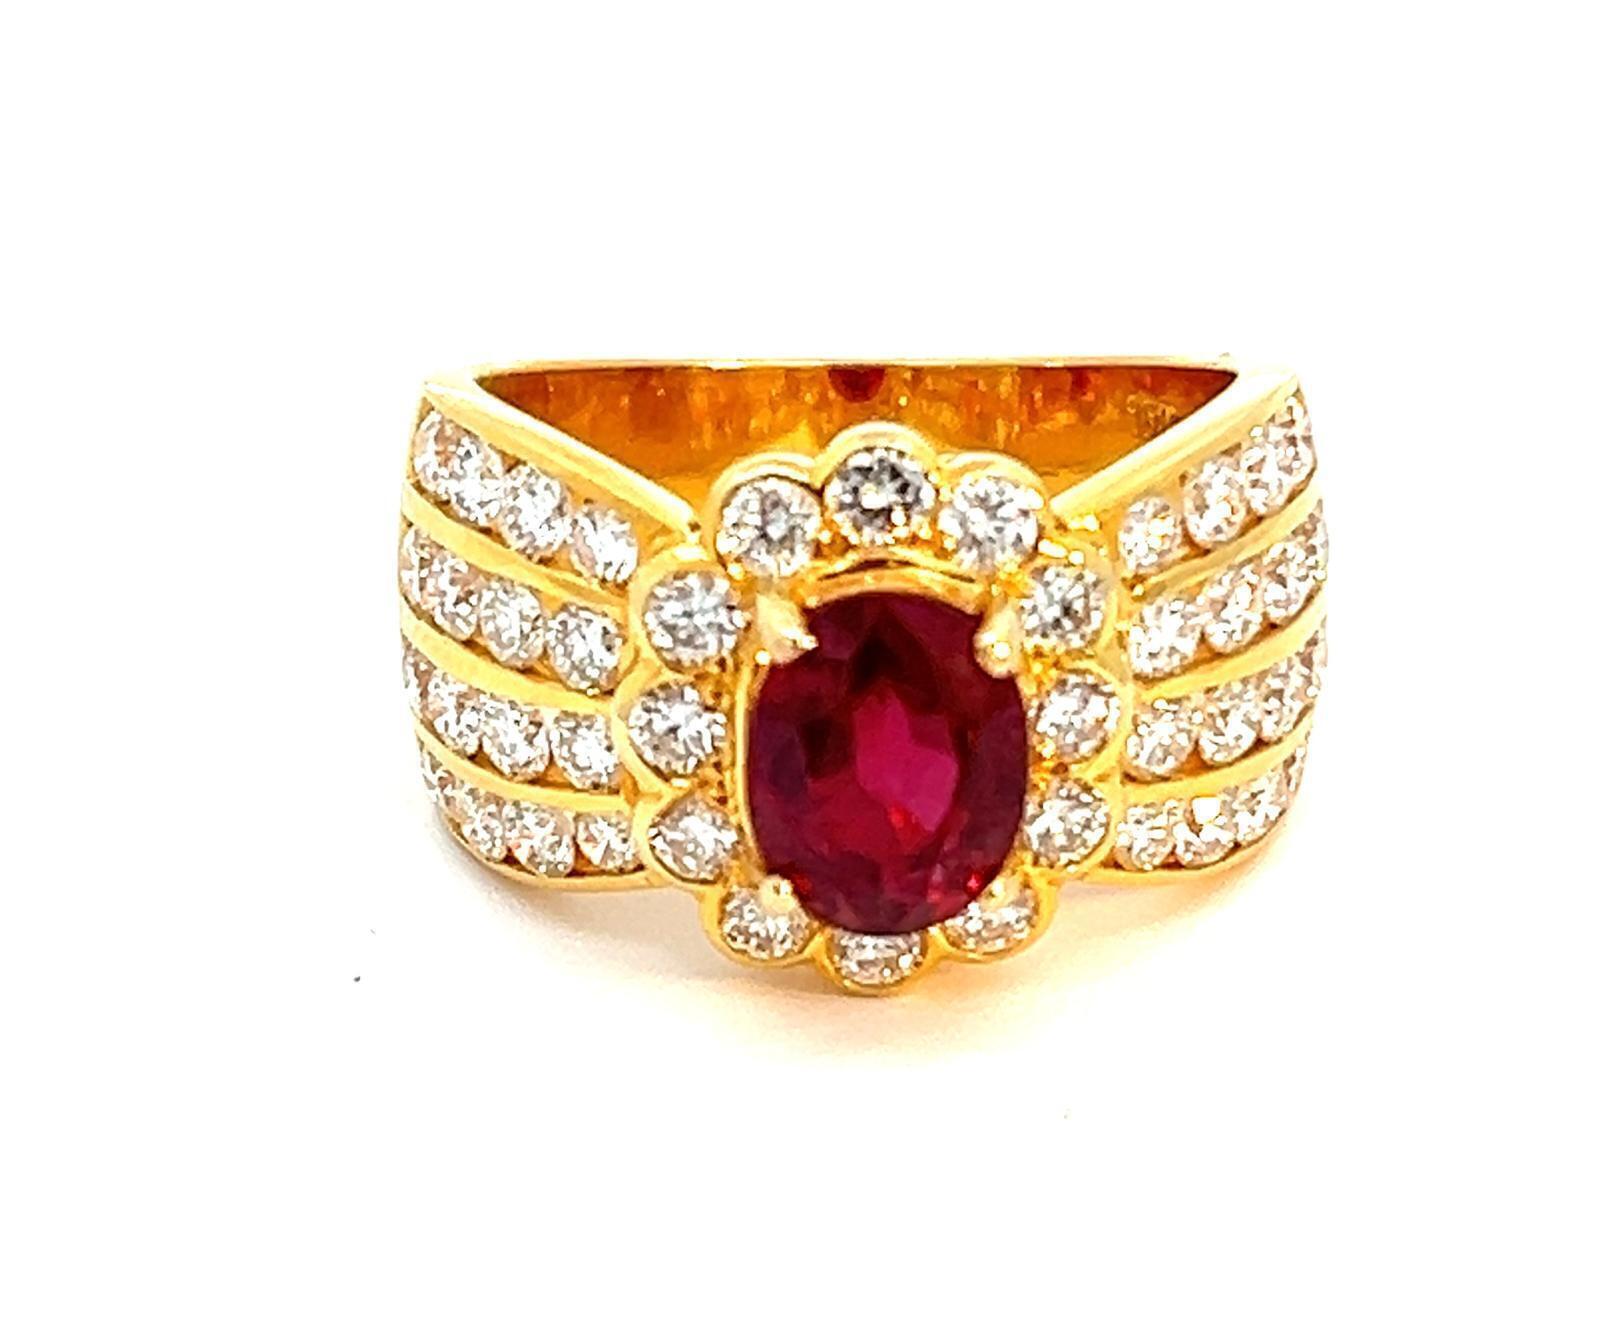 RUBY AND DIAMOND LADIES 18K YELLOW GOLD RING